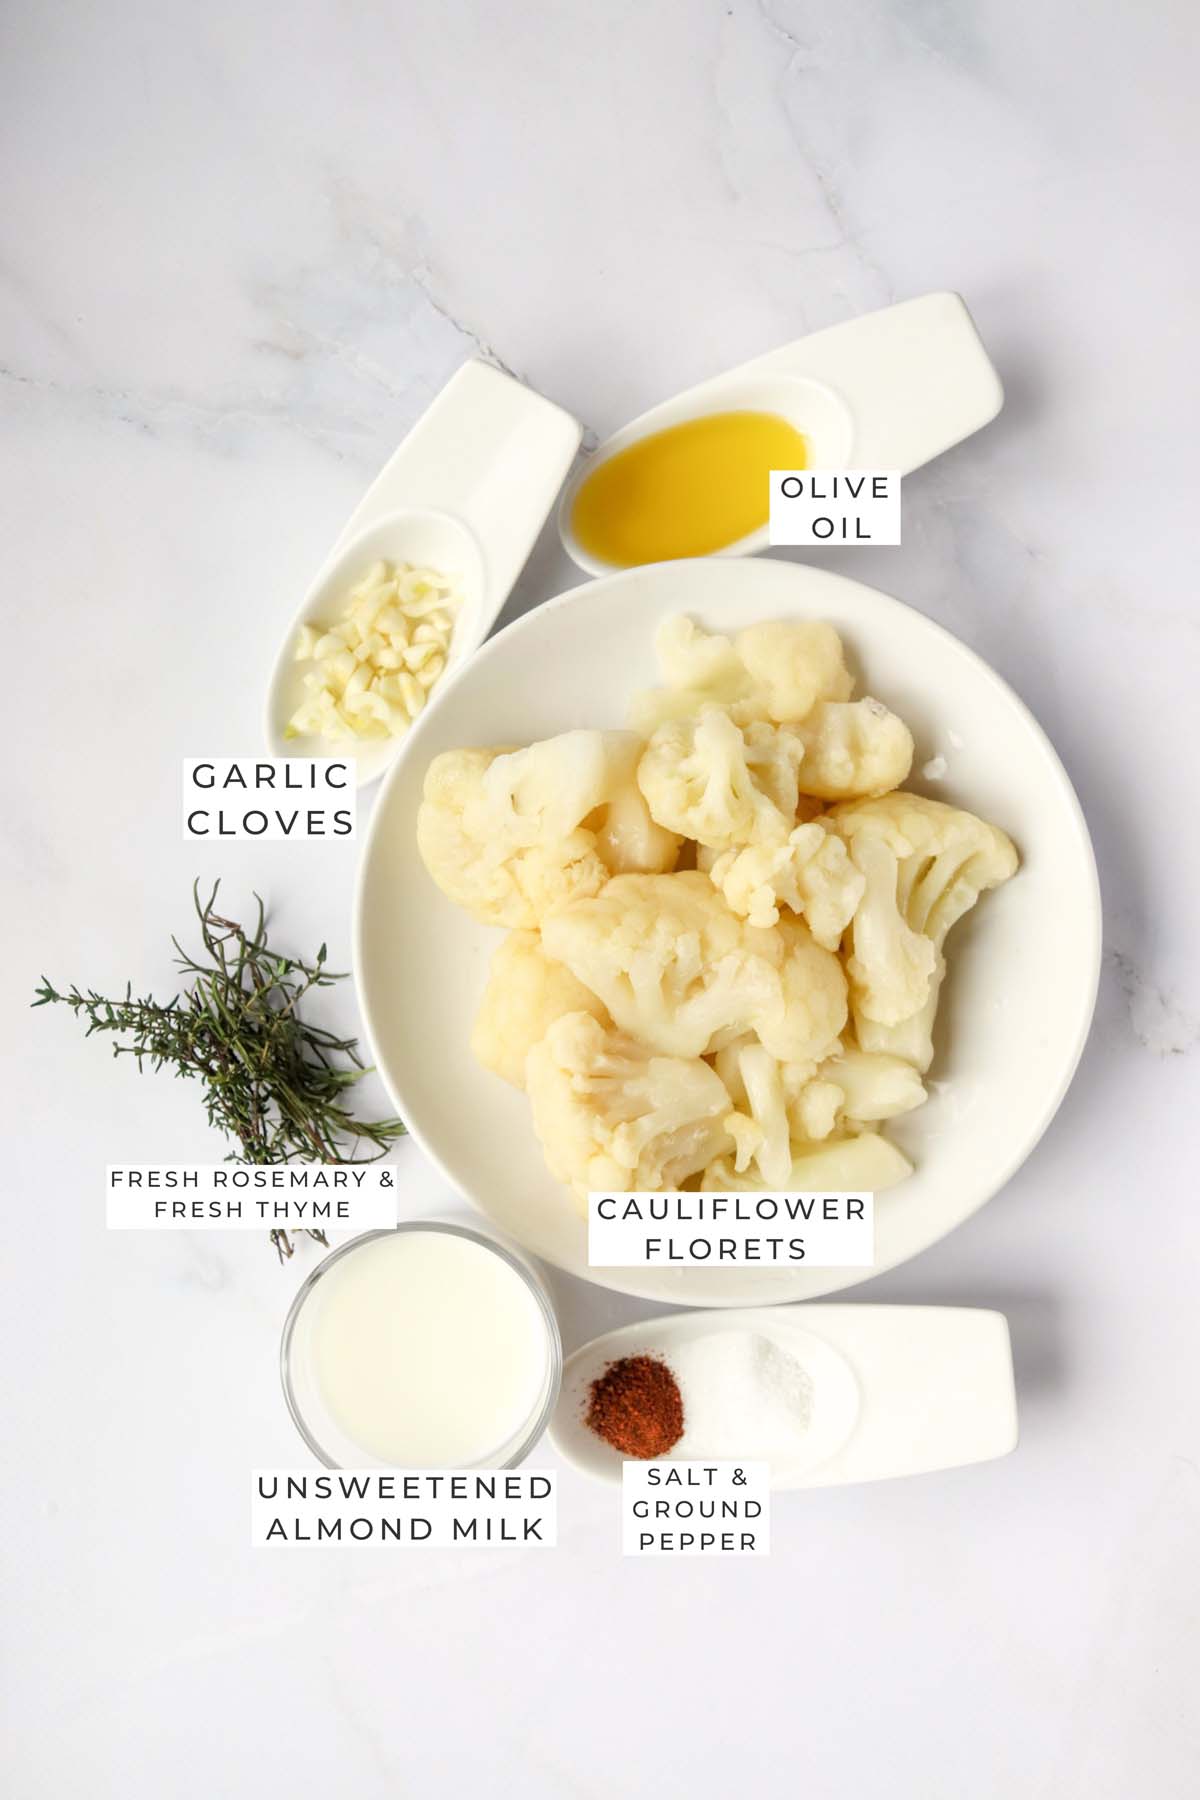 Labeled ingredients for the mashed cauliflower.